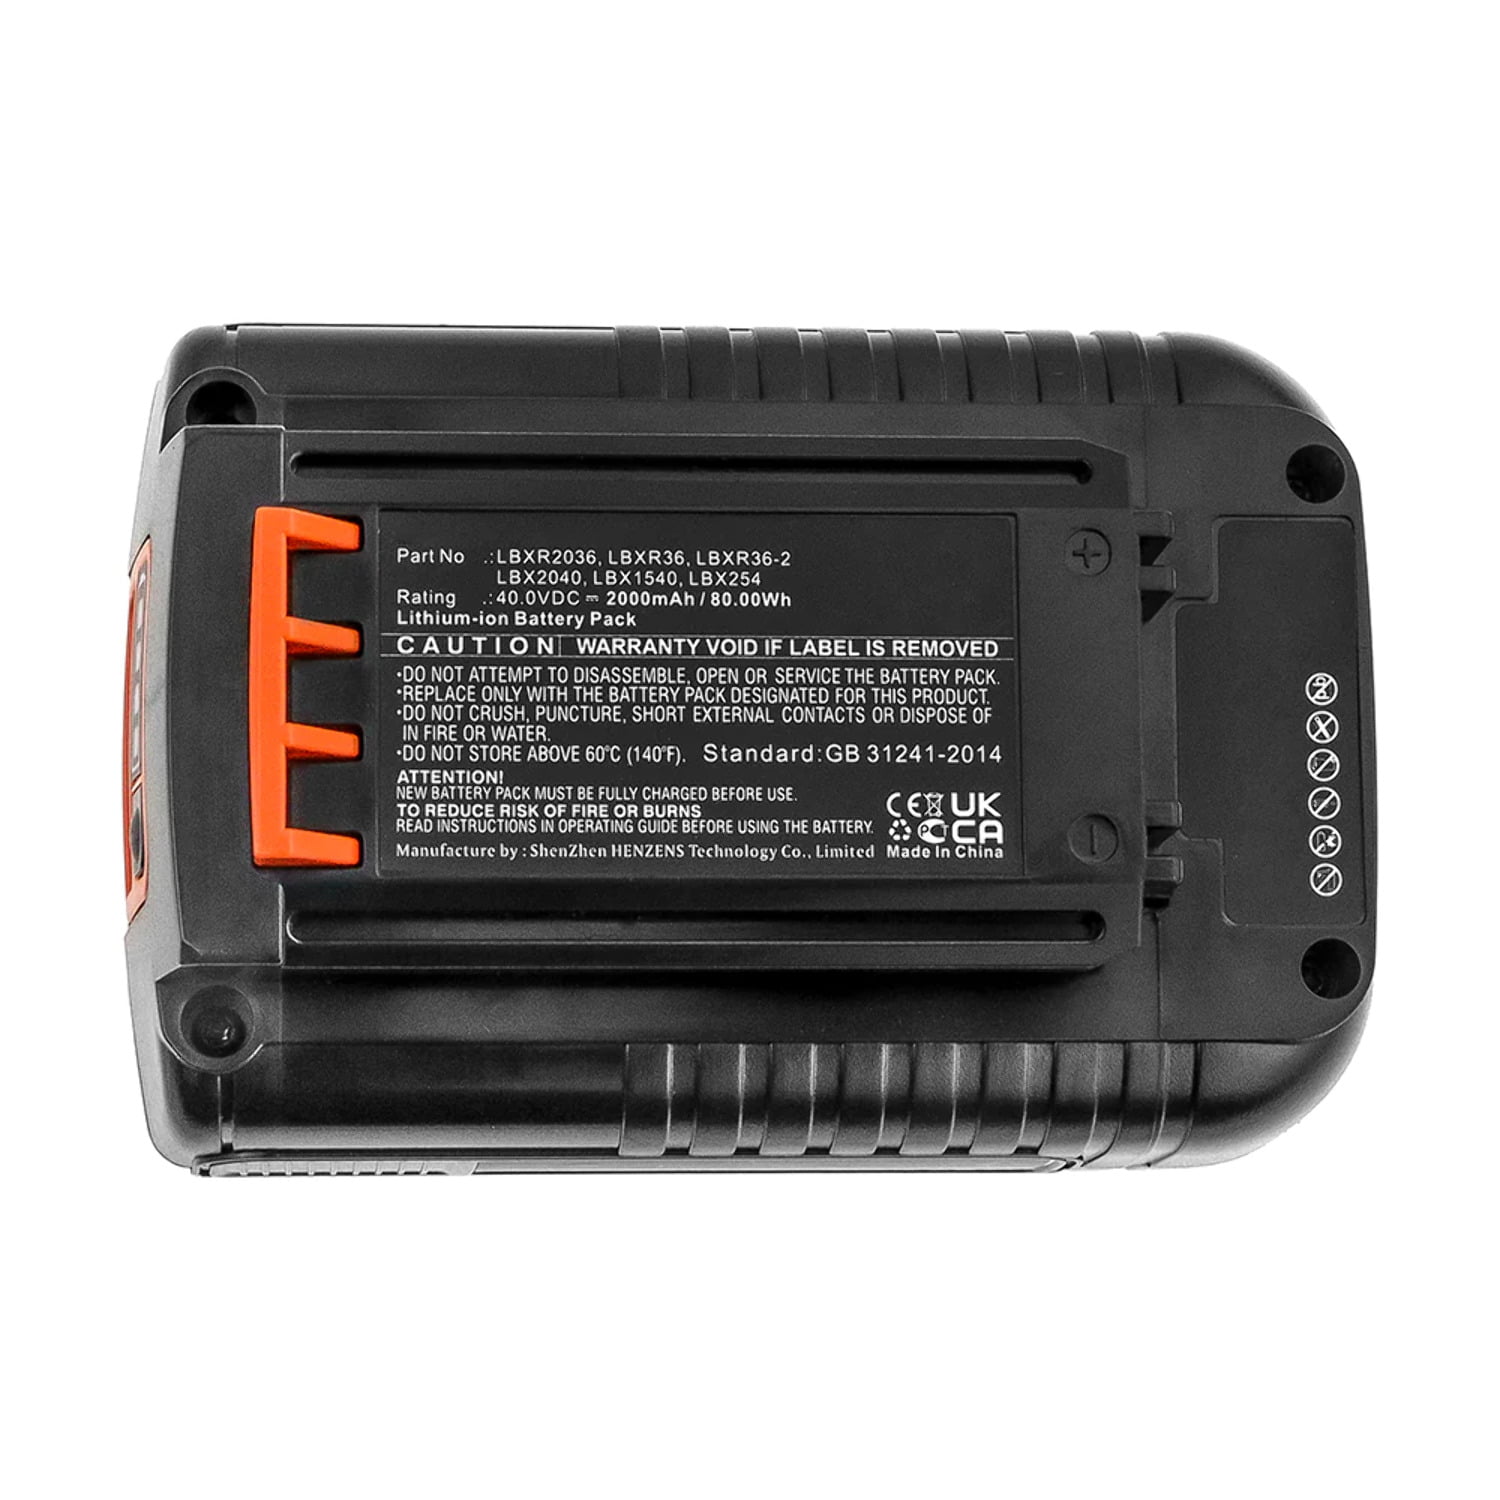 BLACK+DECKER 40-V Lithium-ion Battery in the Power Tool Batteries